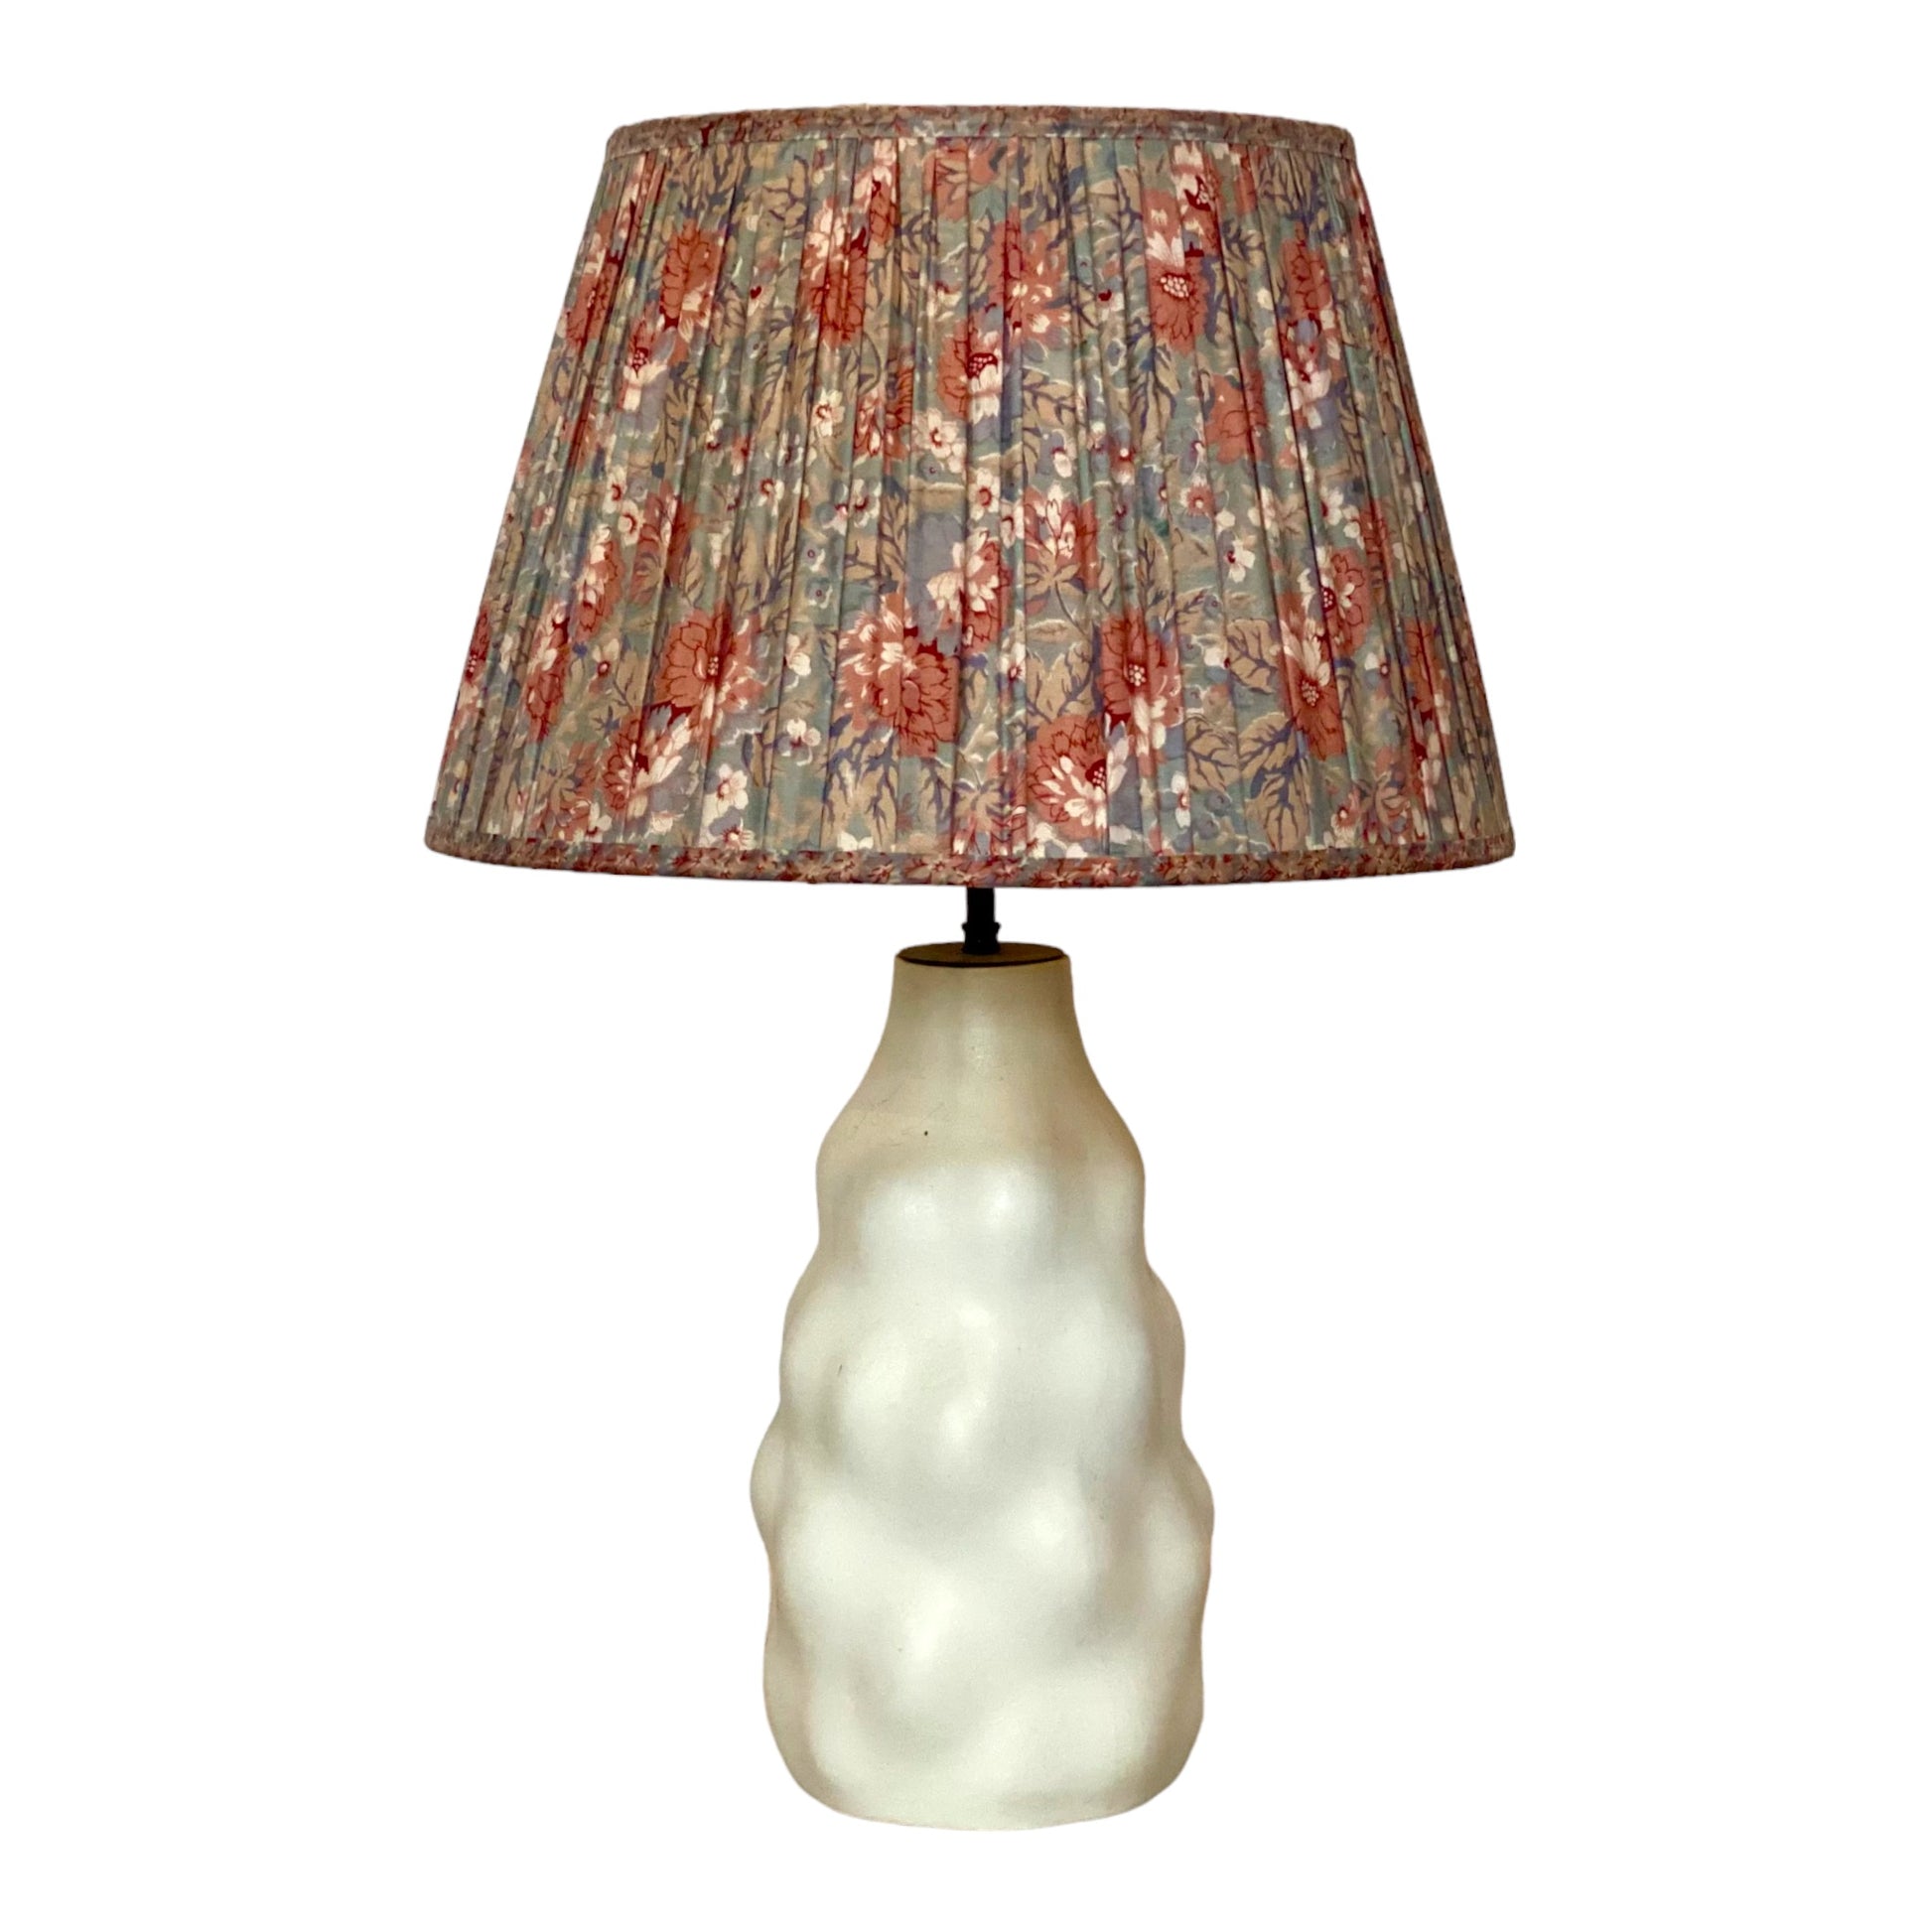 Pink and blue lampshade on iki lamp